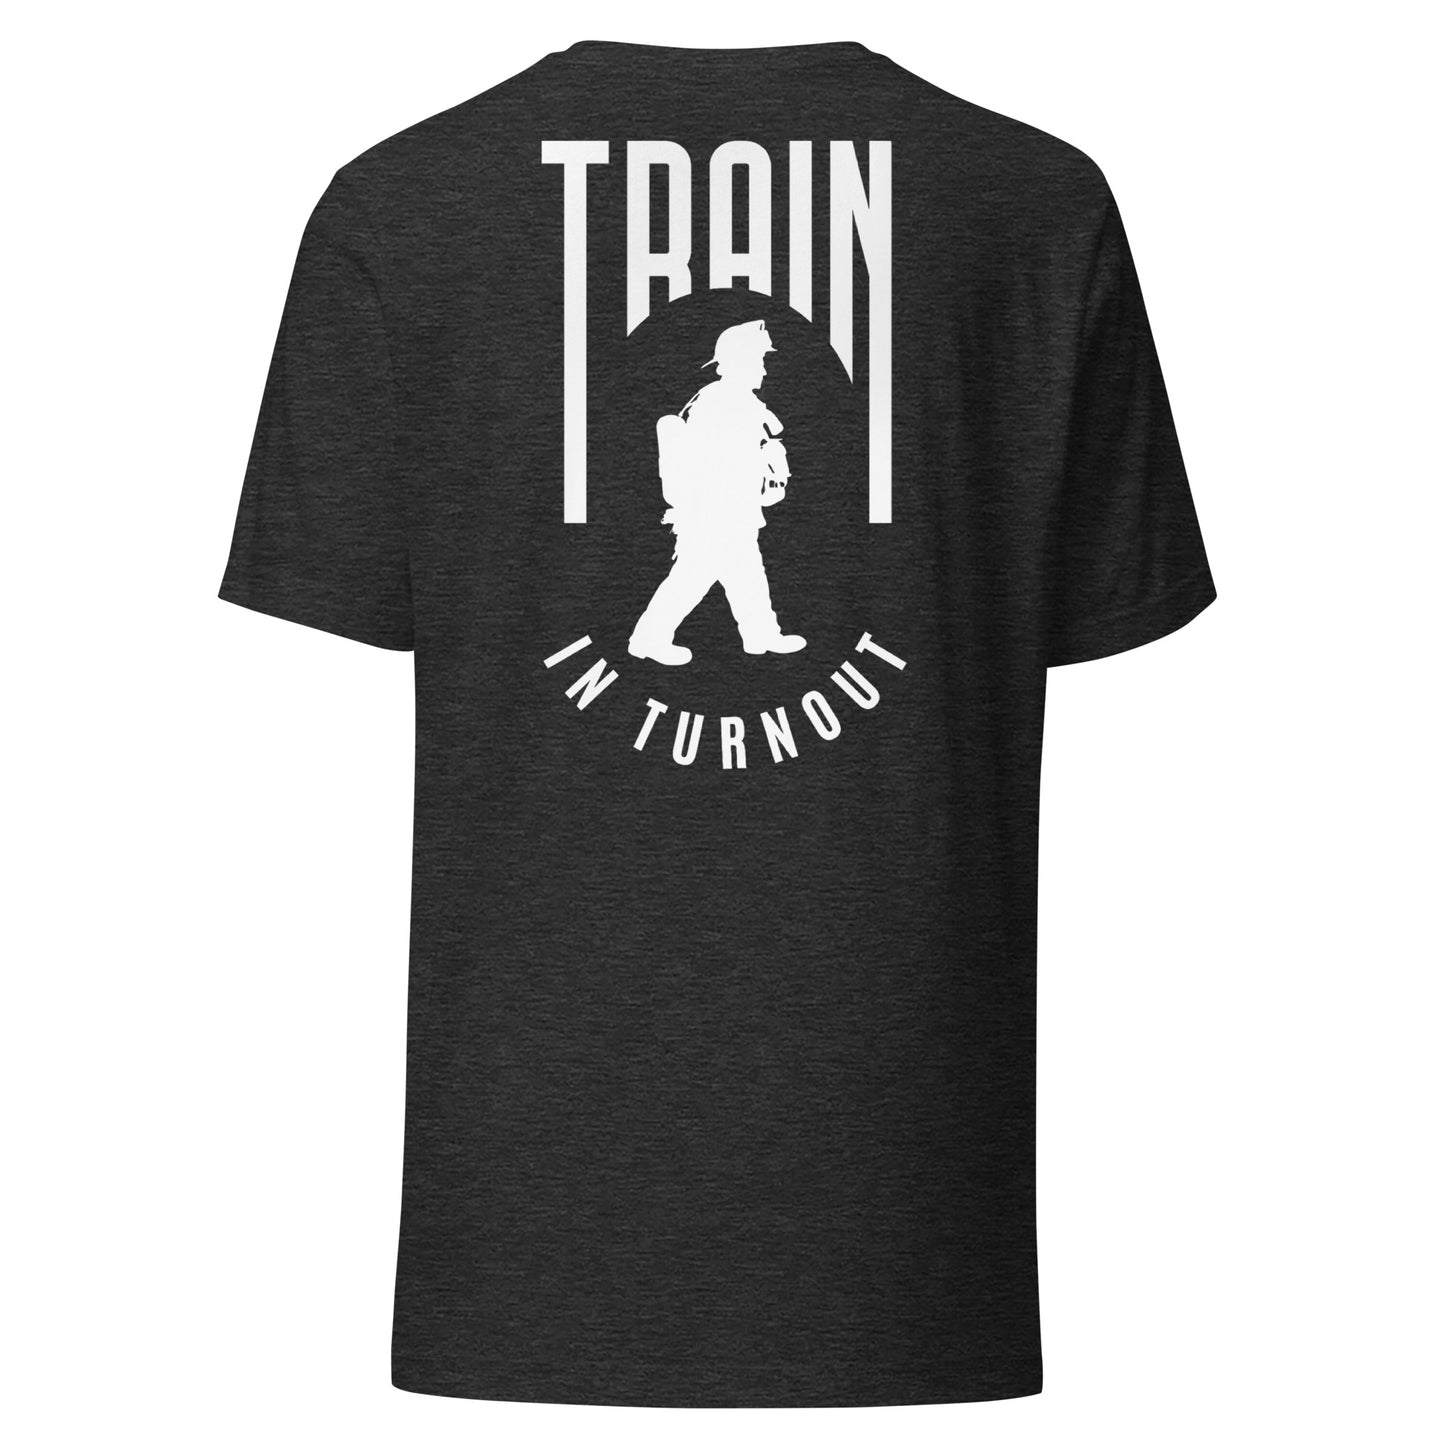 Train in Turnout Graphic Firefighter shirt, dark grey heather and white.